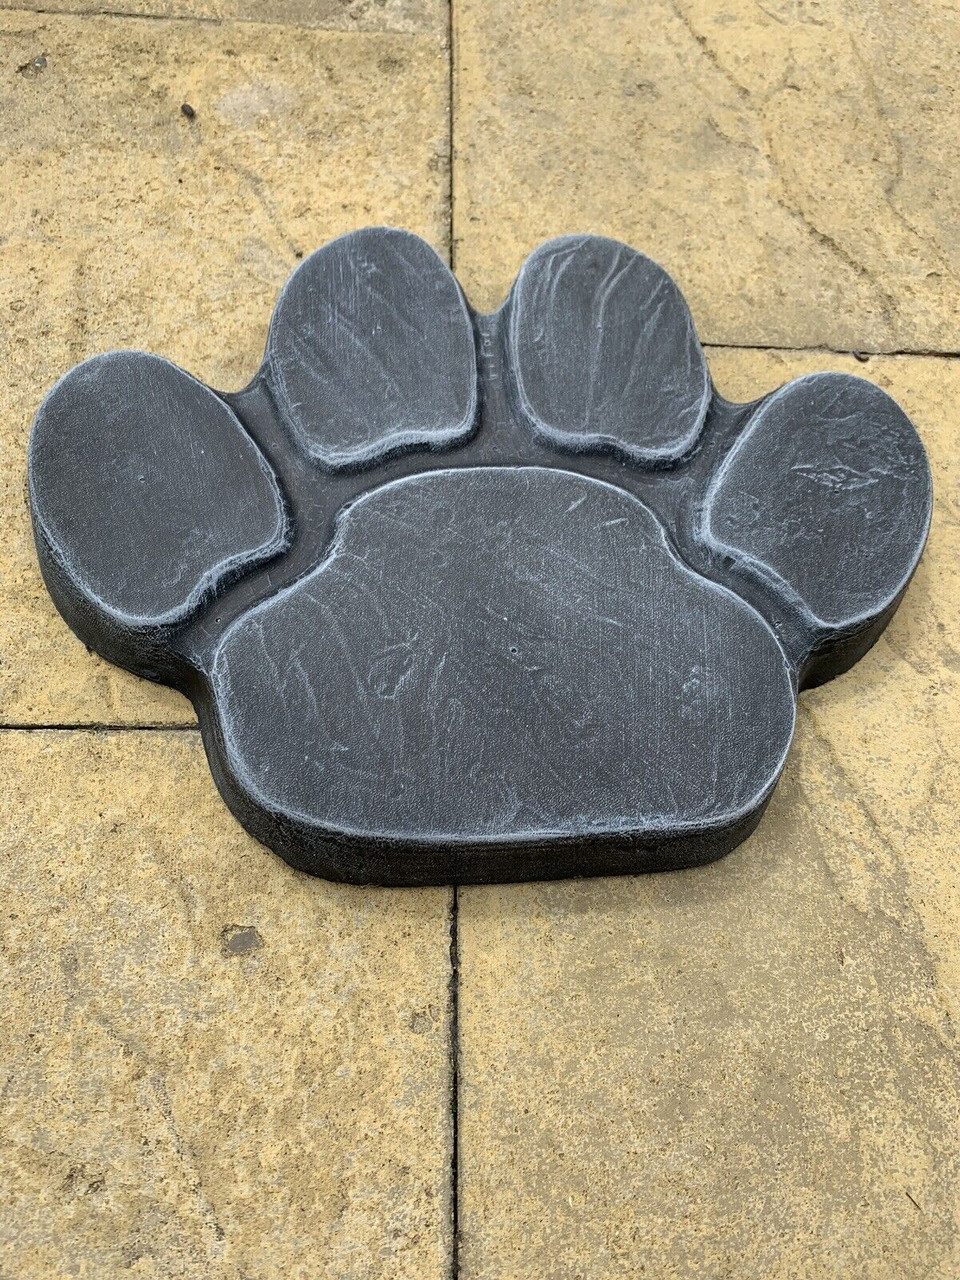 STONE GARDEN LARGE PAW PRINT STEPPING STONE MEMORIAL DOG CAT CONCRETE ORNAMENT